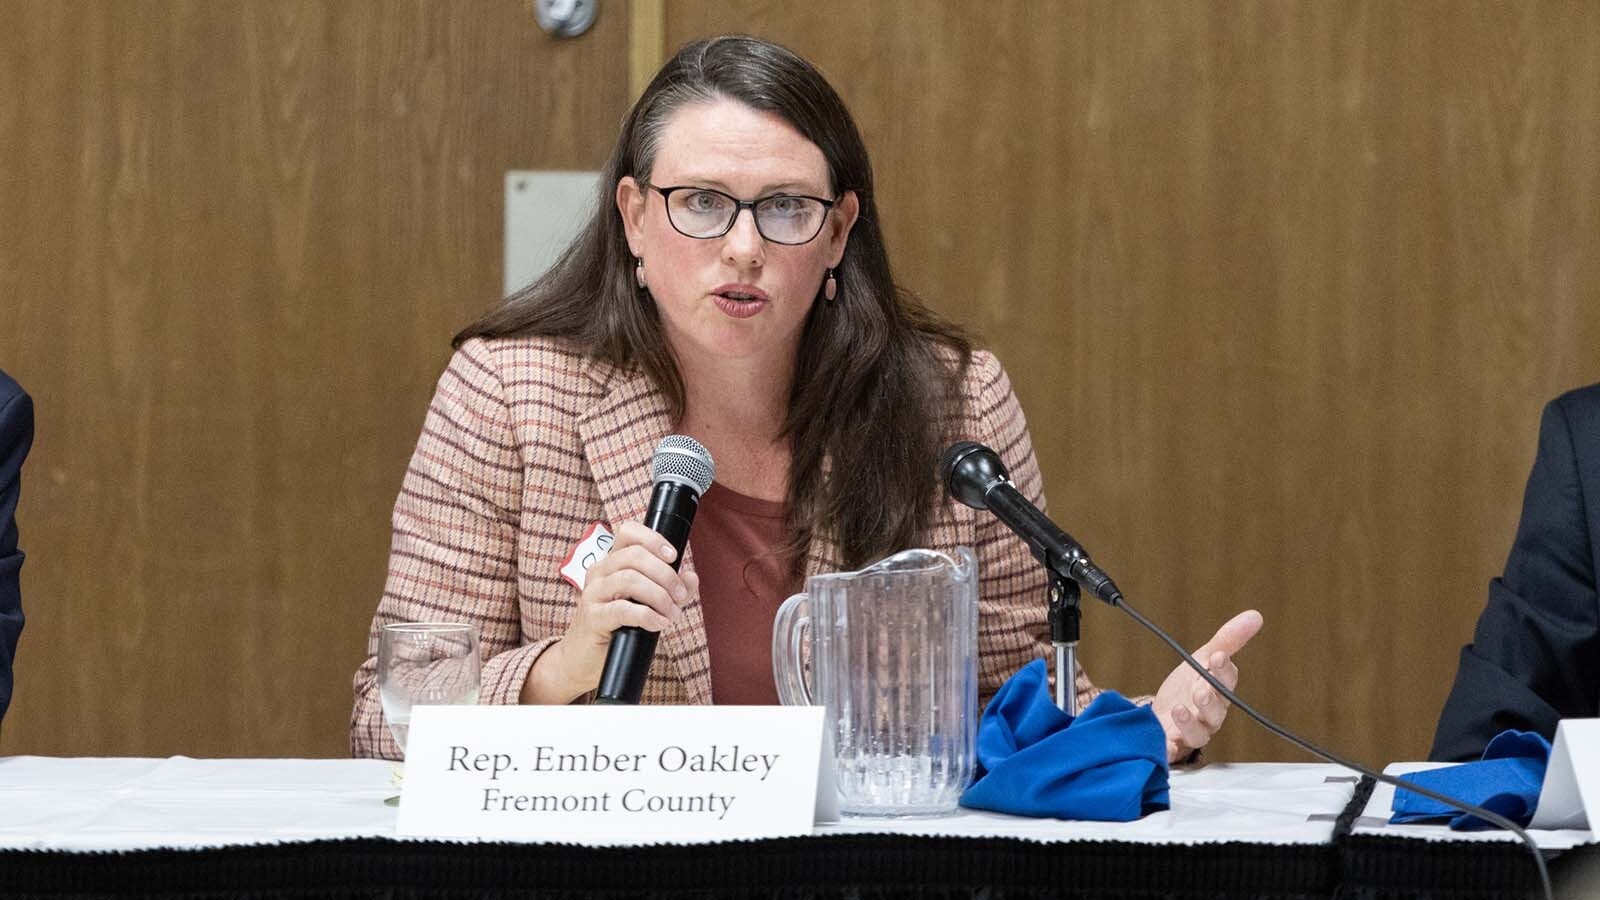 State Rep. Ember Oakley was active in a panel discussion on the Wyoming GOP on Thursday evening in Casper.